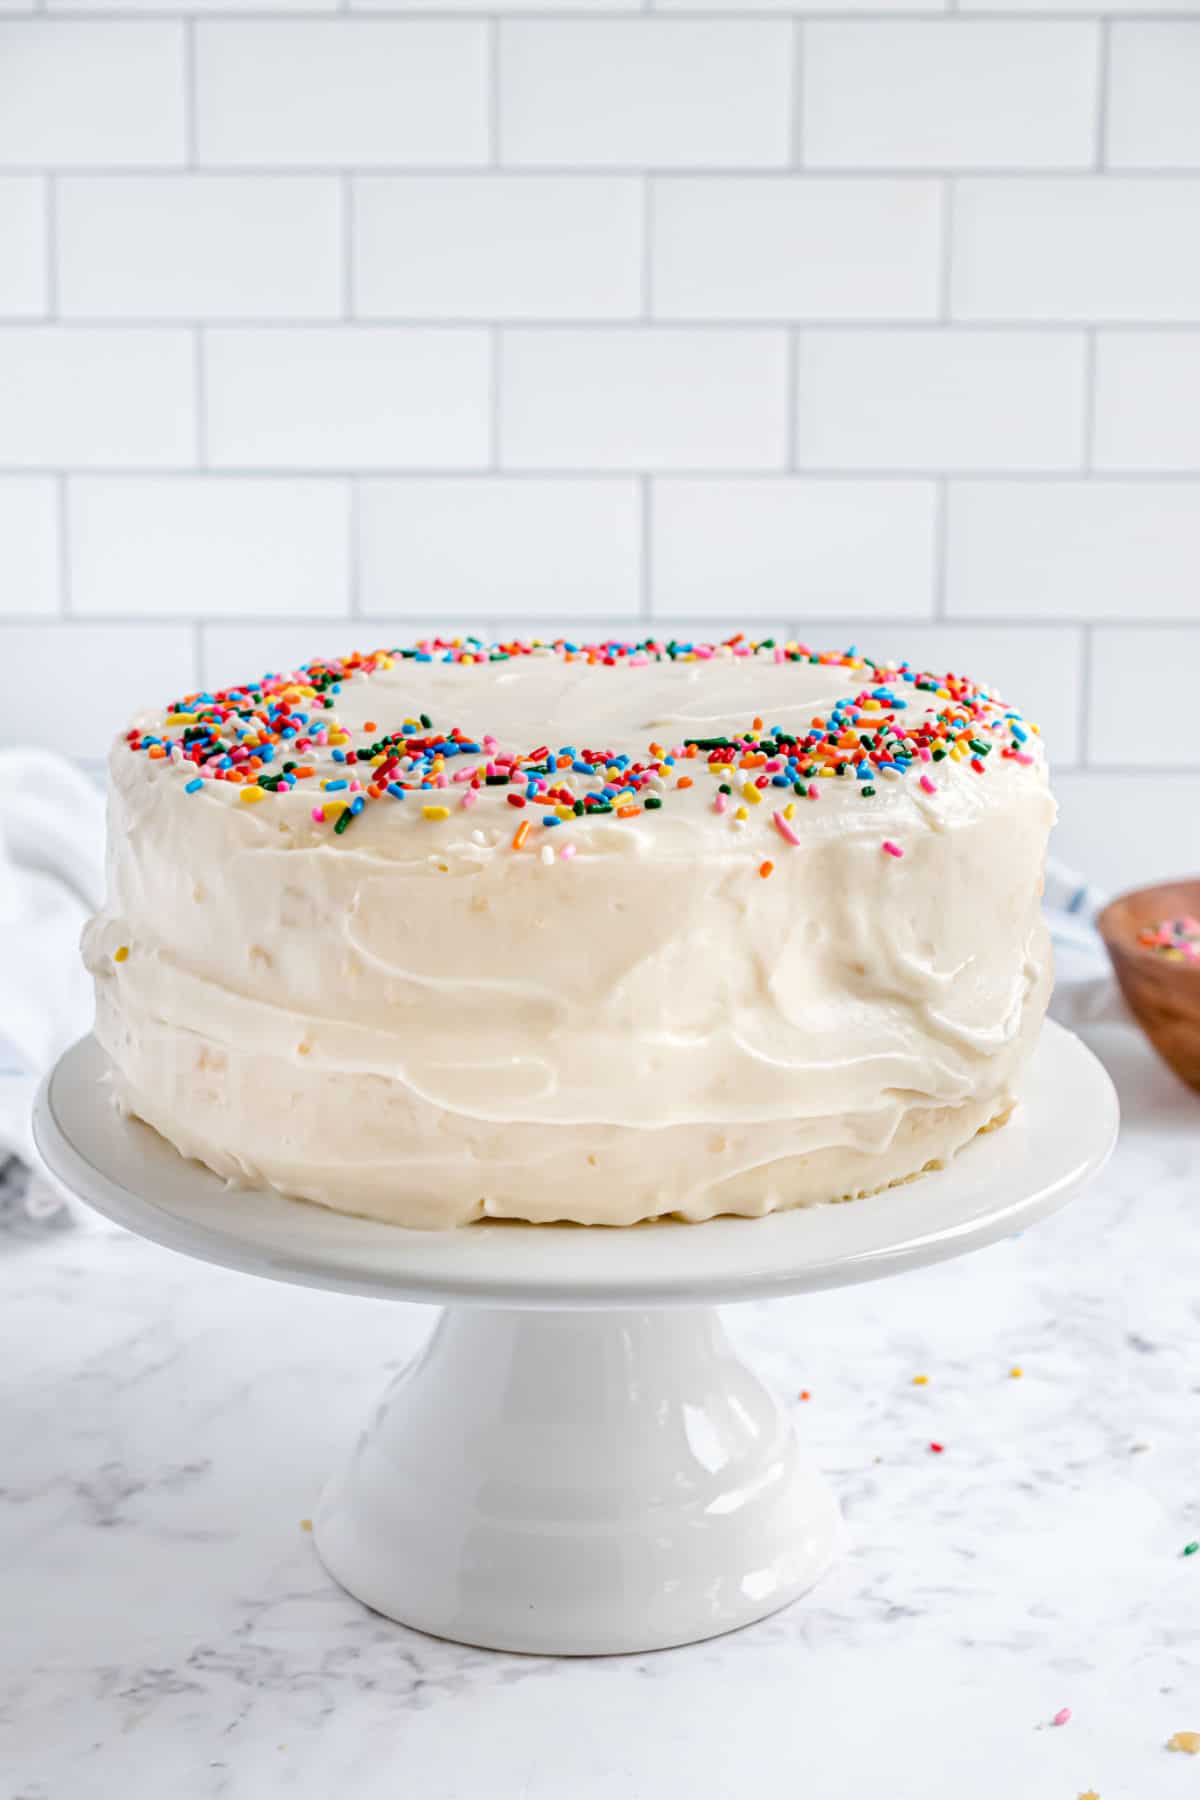 Vanilla cake with vanilla frosting on a white cake stand, topped with sprinkles.